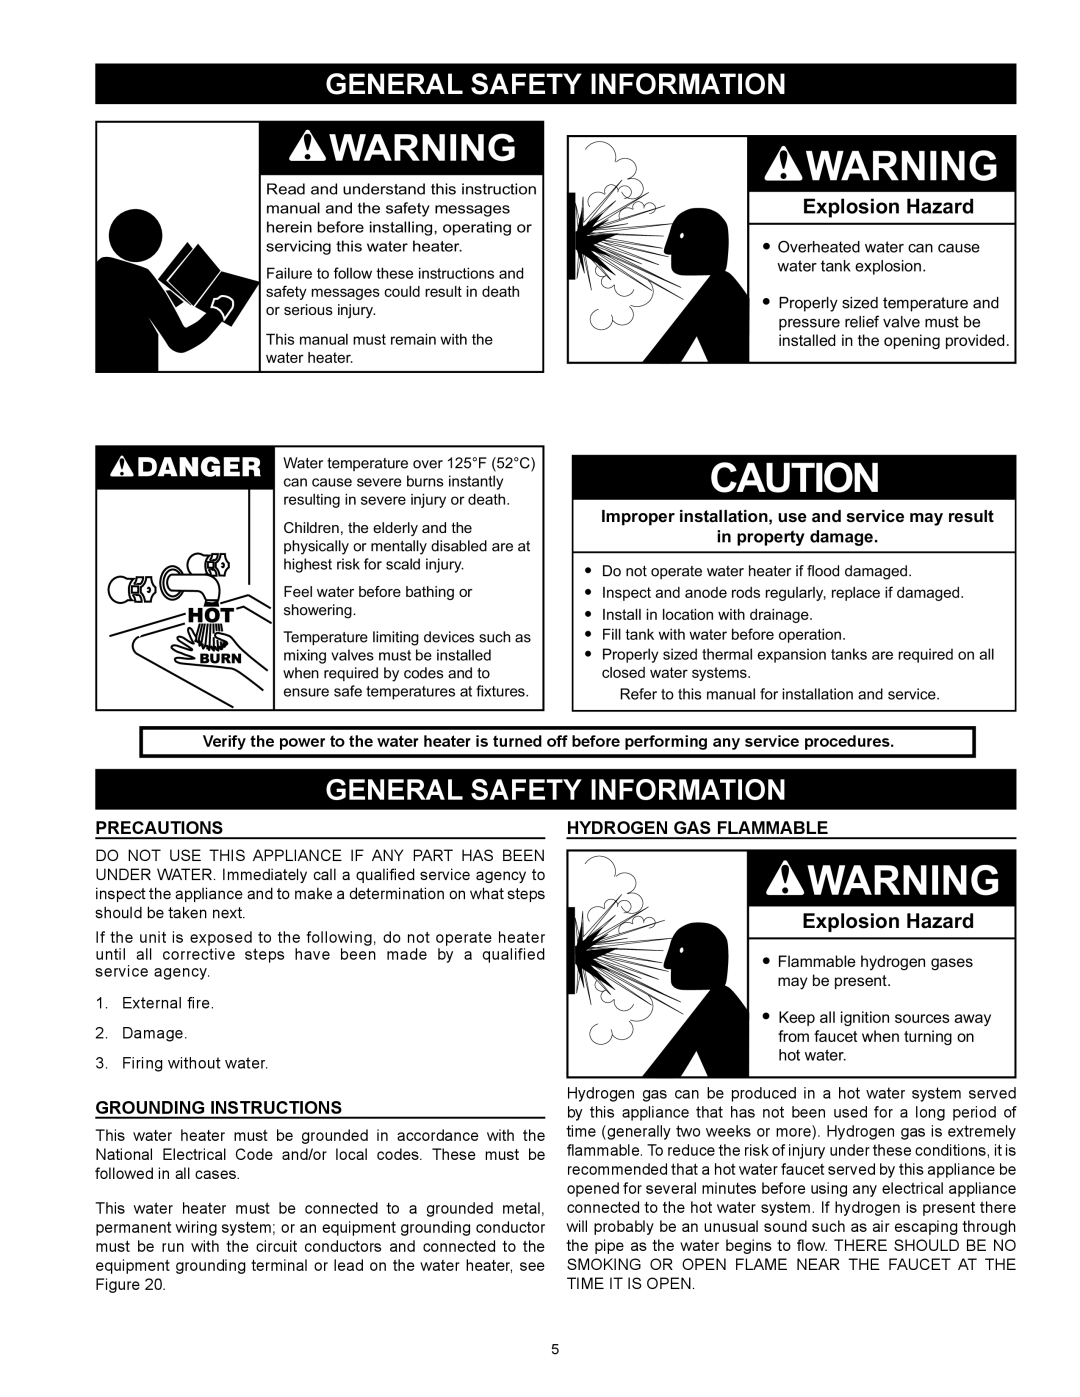 State Industries SBD85500PE, SBD85500NE Explosion Hazard, General Safety Information, Precautions, Grounding Instructions 